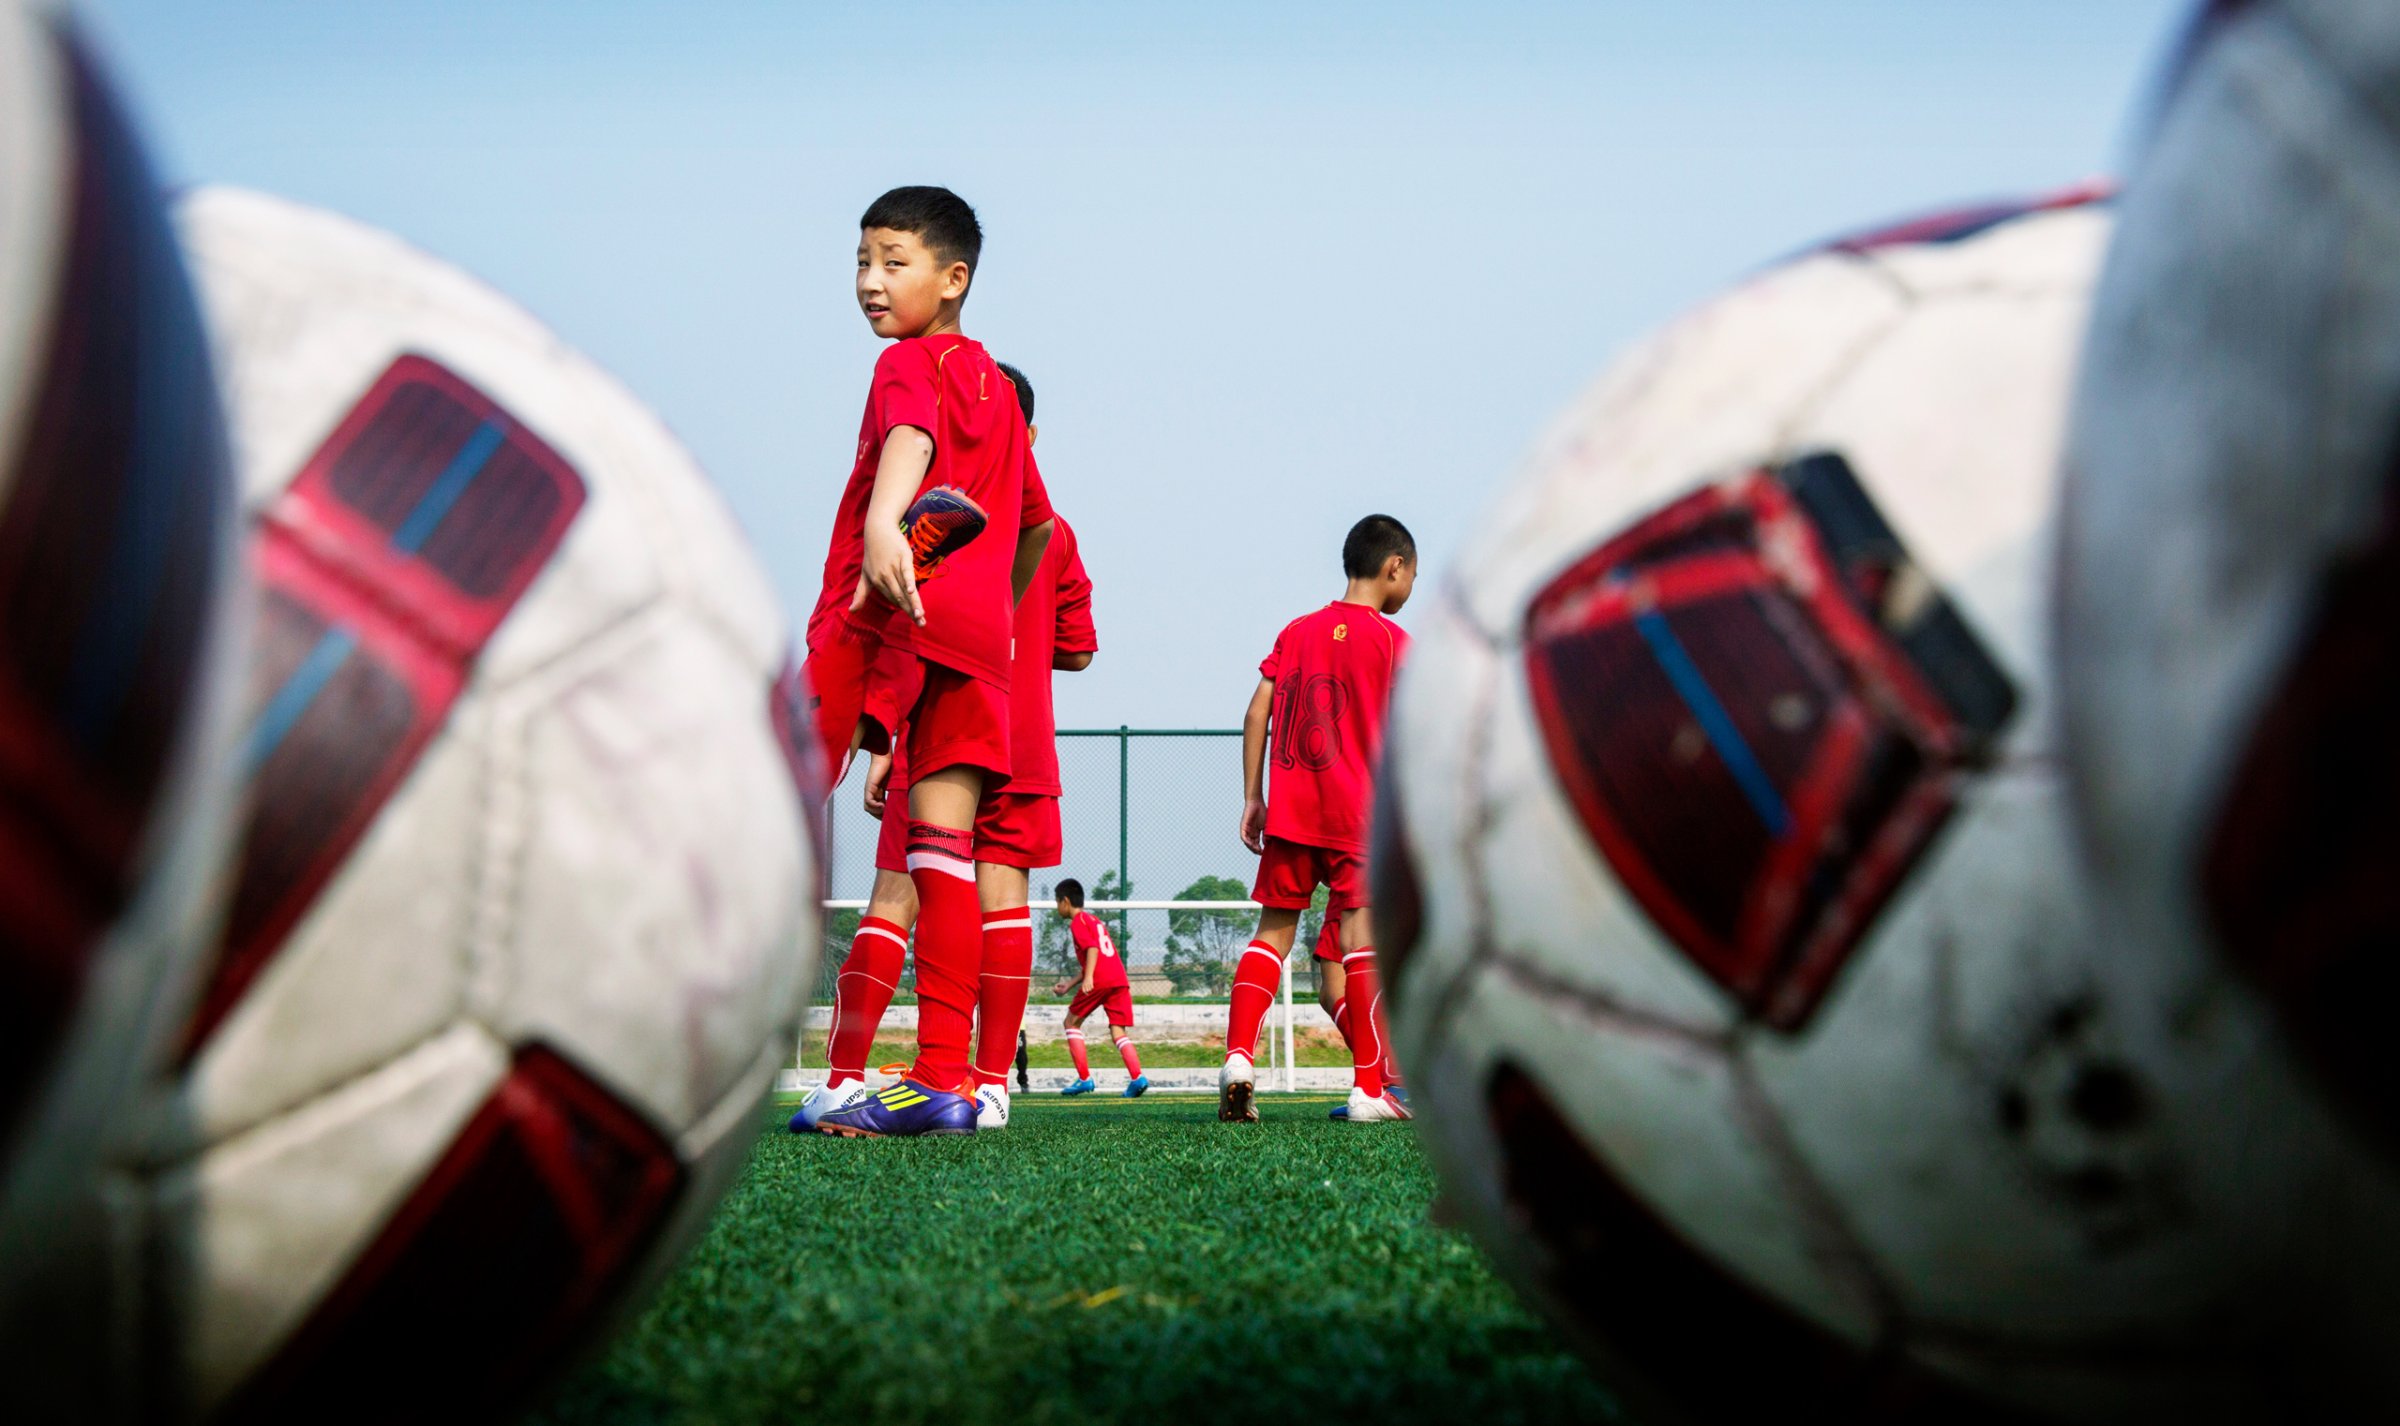 Chinese students wait their turn during training at the Evergrande Football School near Qingyuan